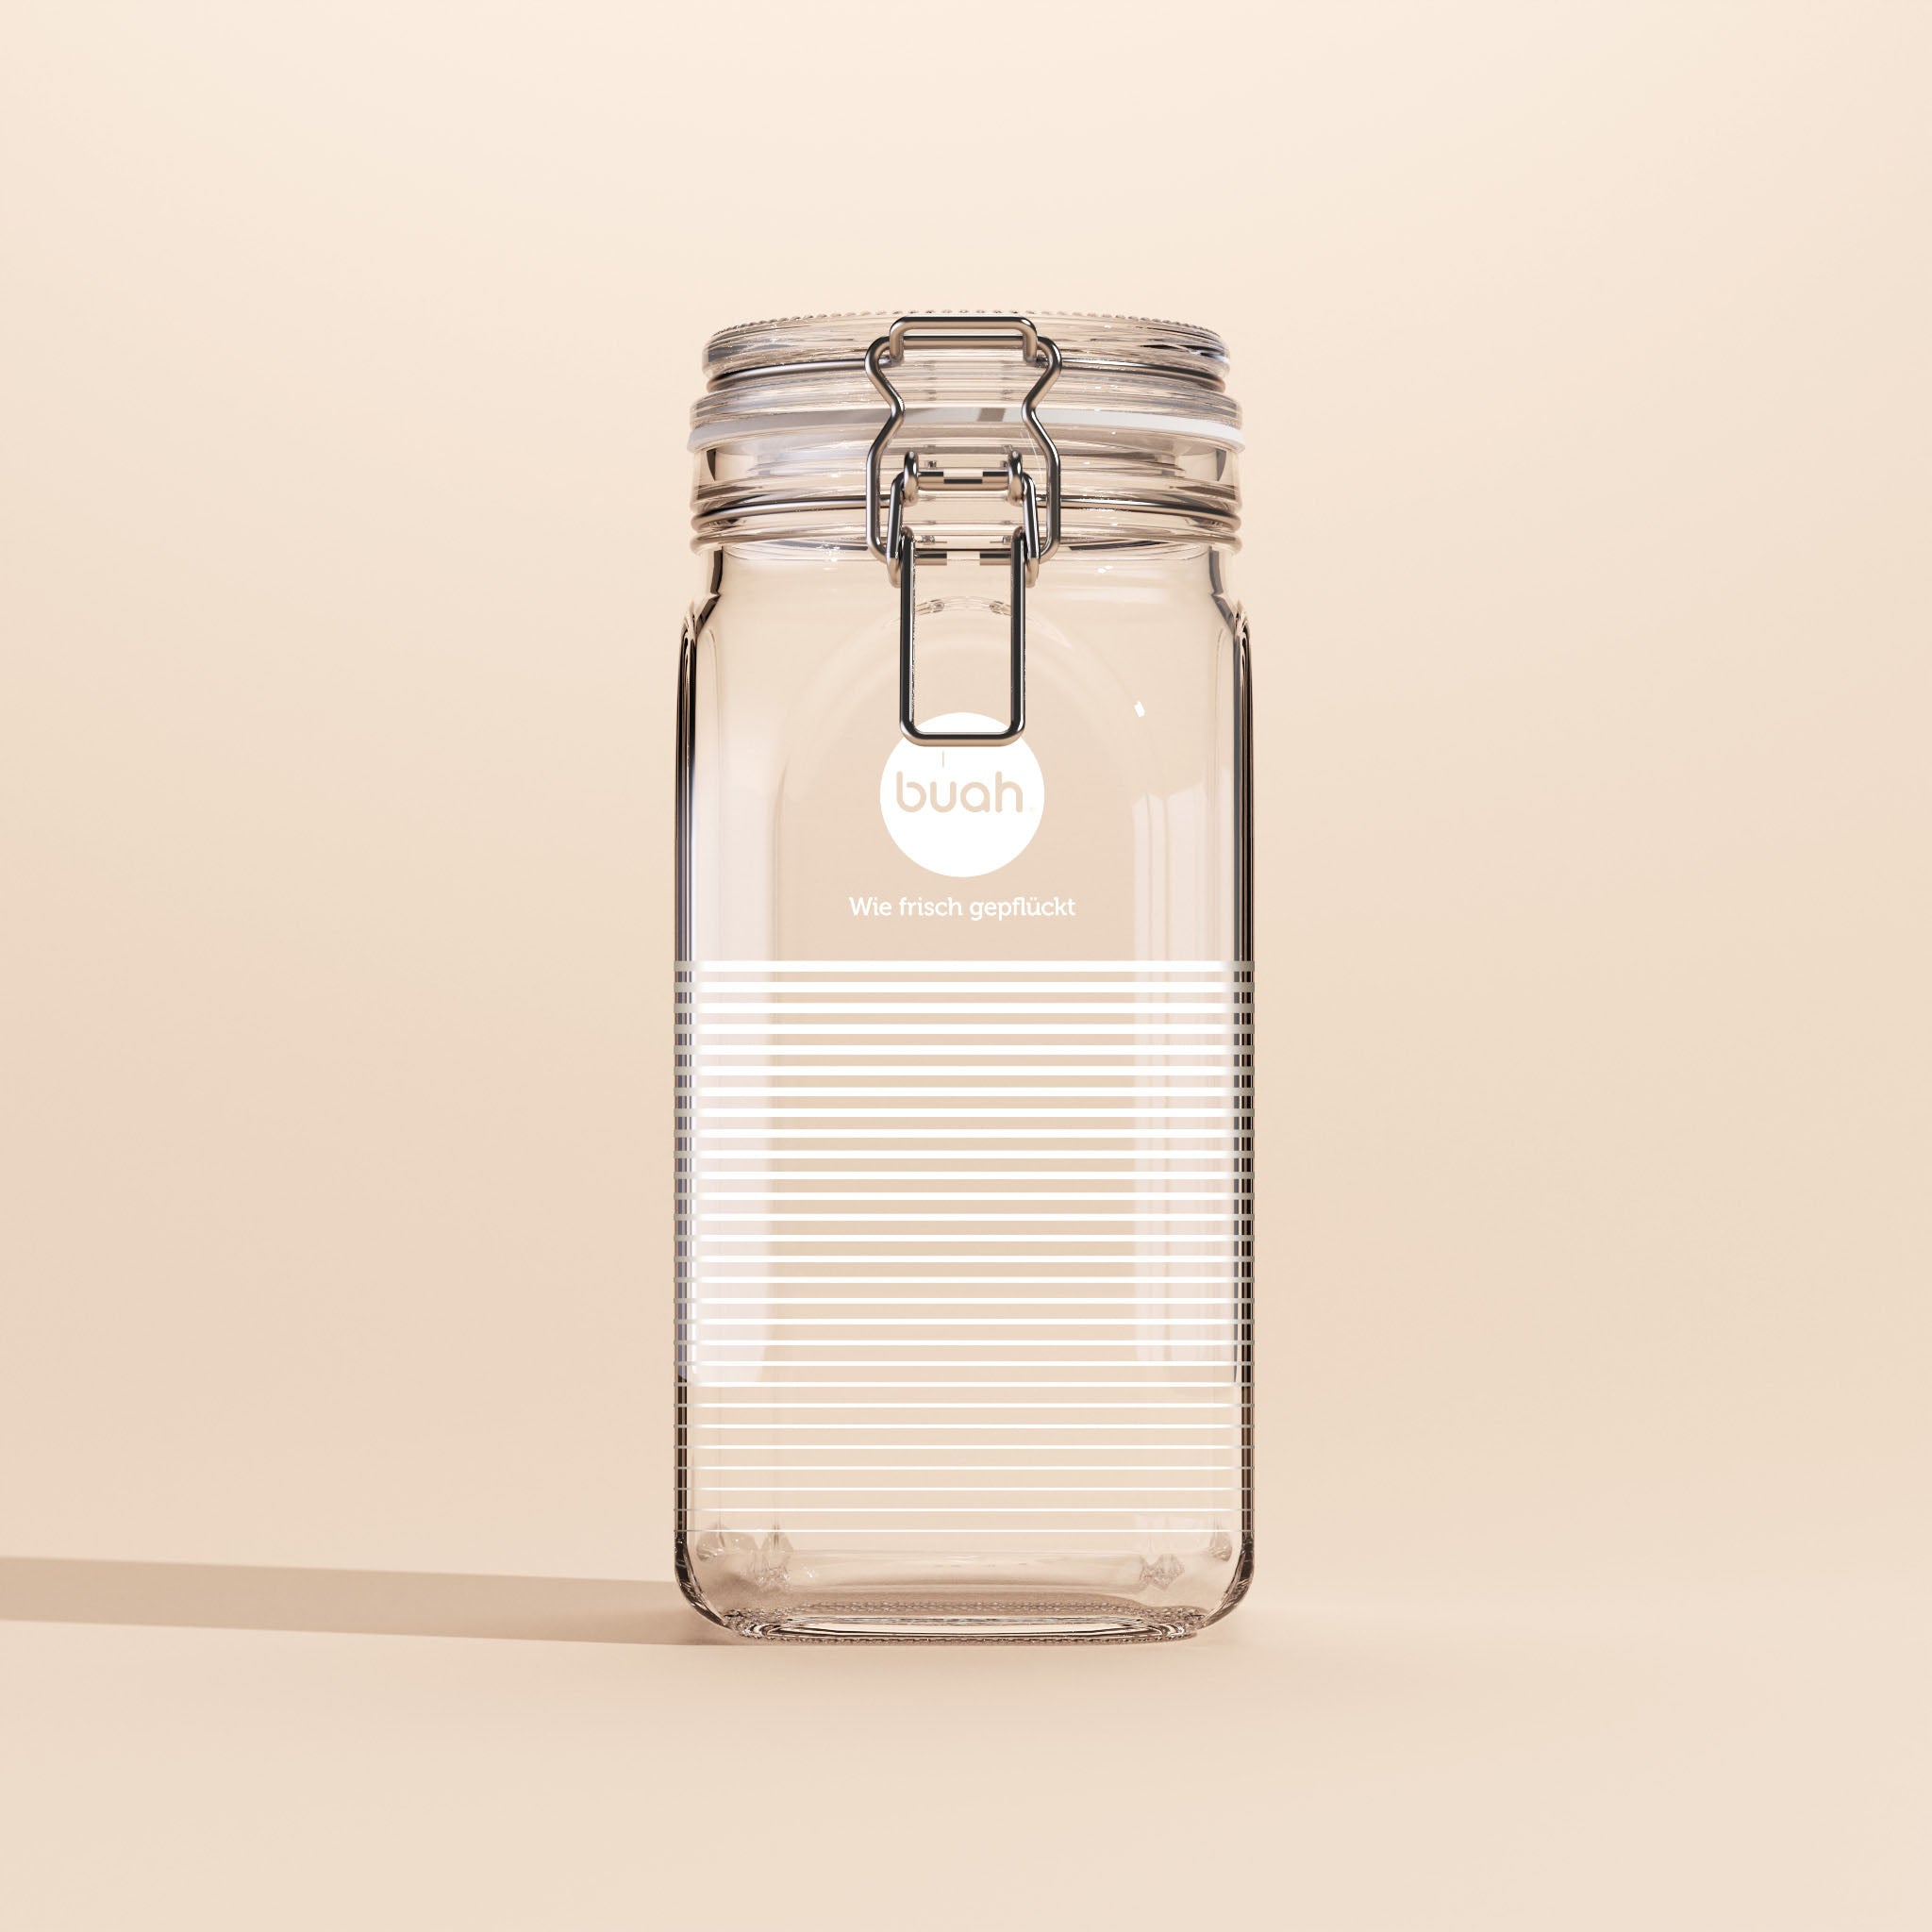 Refill glass 1.5l (without content)